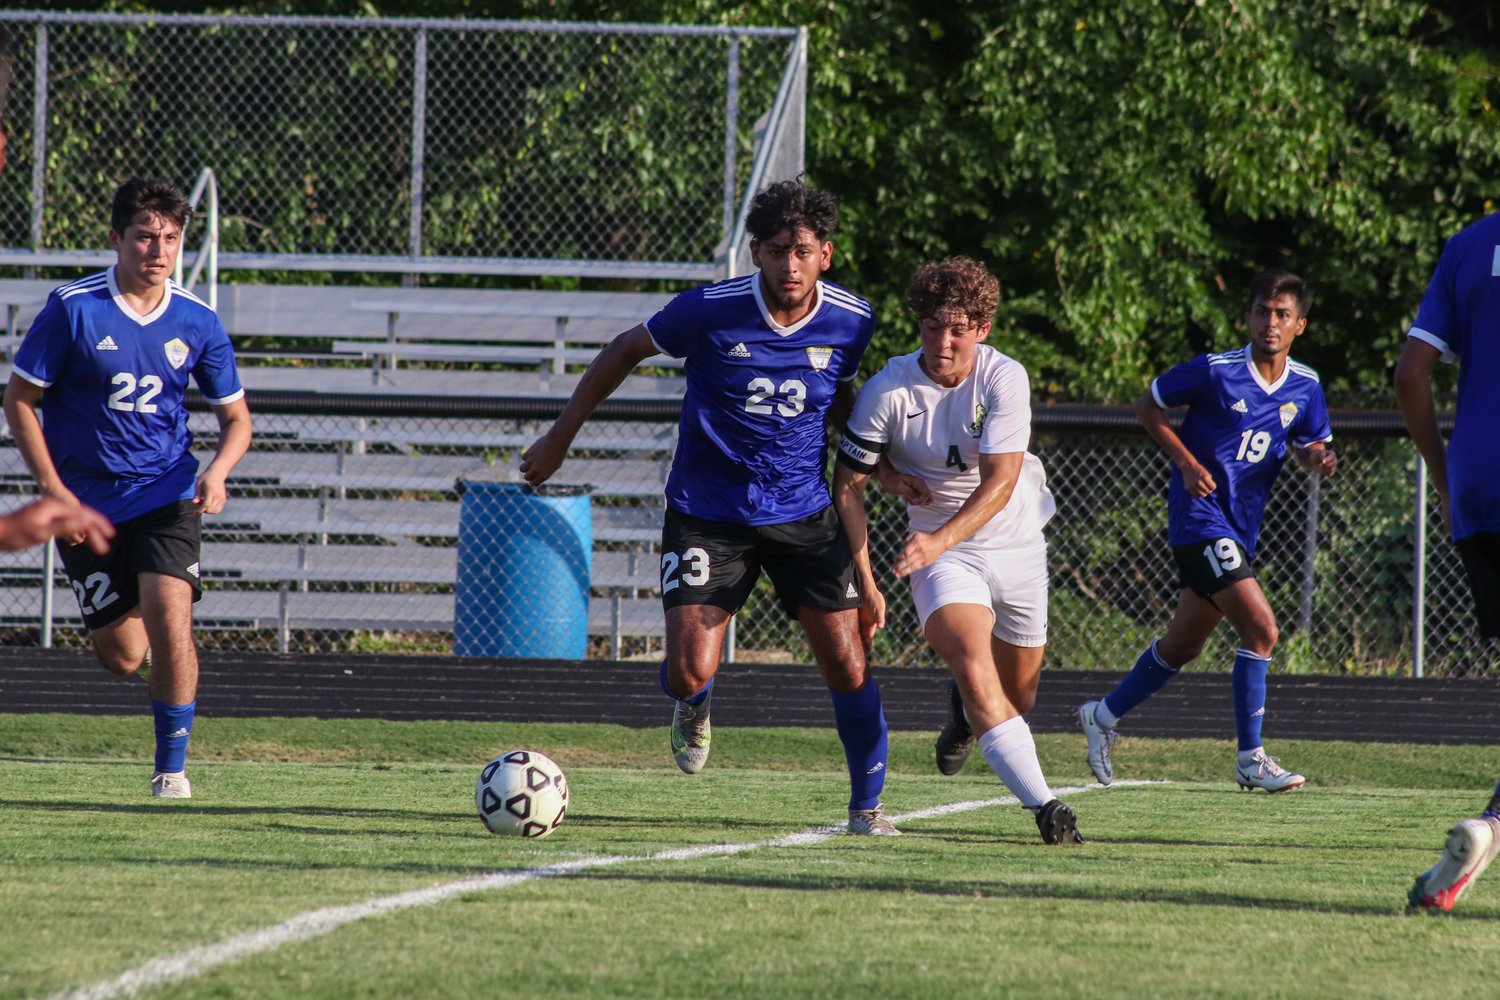 Jordan-Matthews' Juan Soto Hernandez (23) and Northwood's Walker Johnson (4) sprint toward the ball in the Jets' 4-1 season-opening win over the Chargers last Thursday in Siler City.